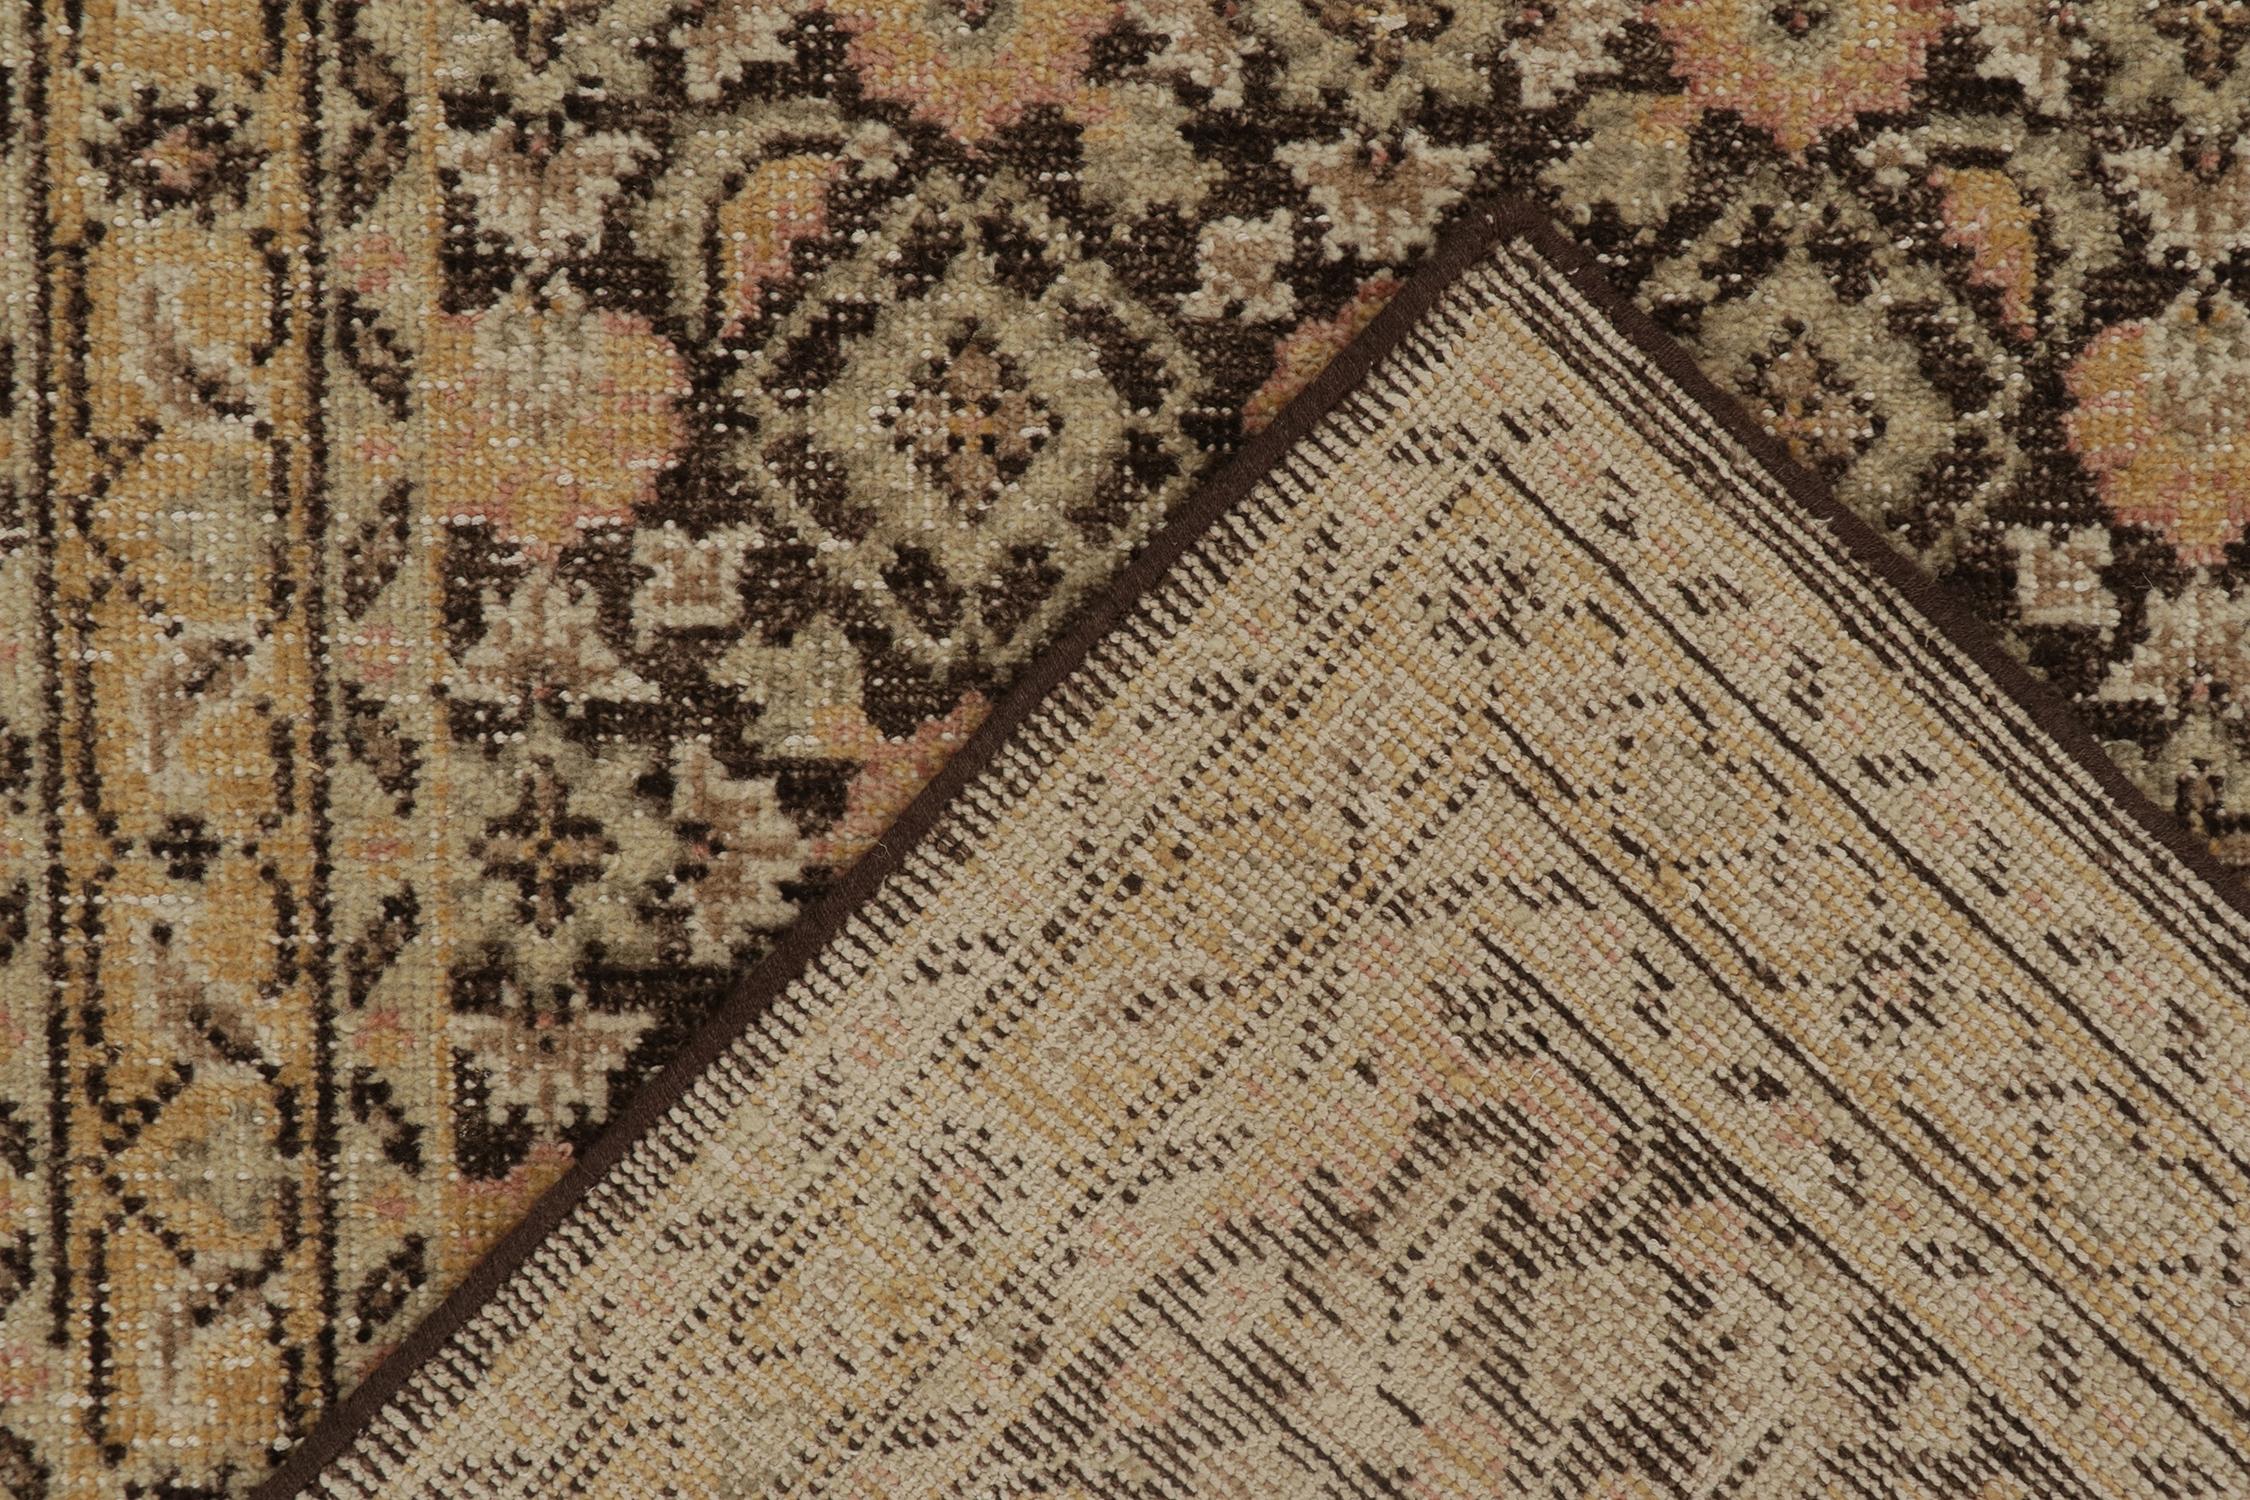 Wool Rug & Kilim’s Distressed Persian Style Rug in Brown and Gold Floral Patterns For Sale